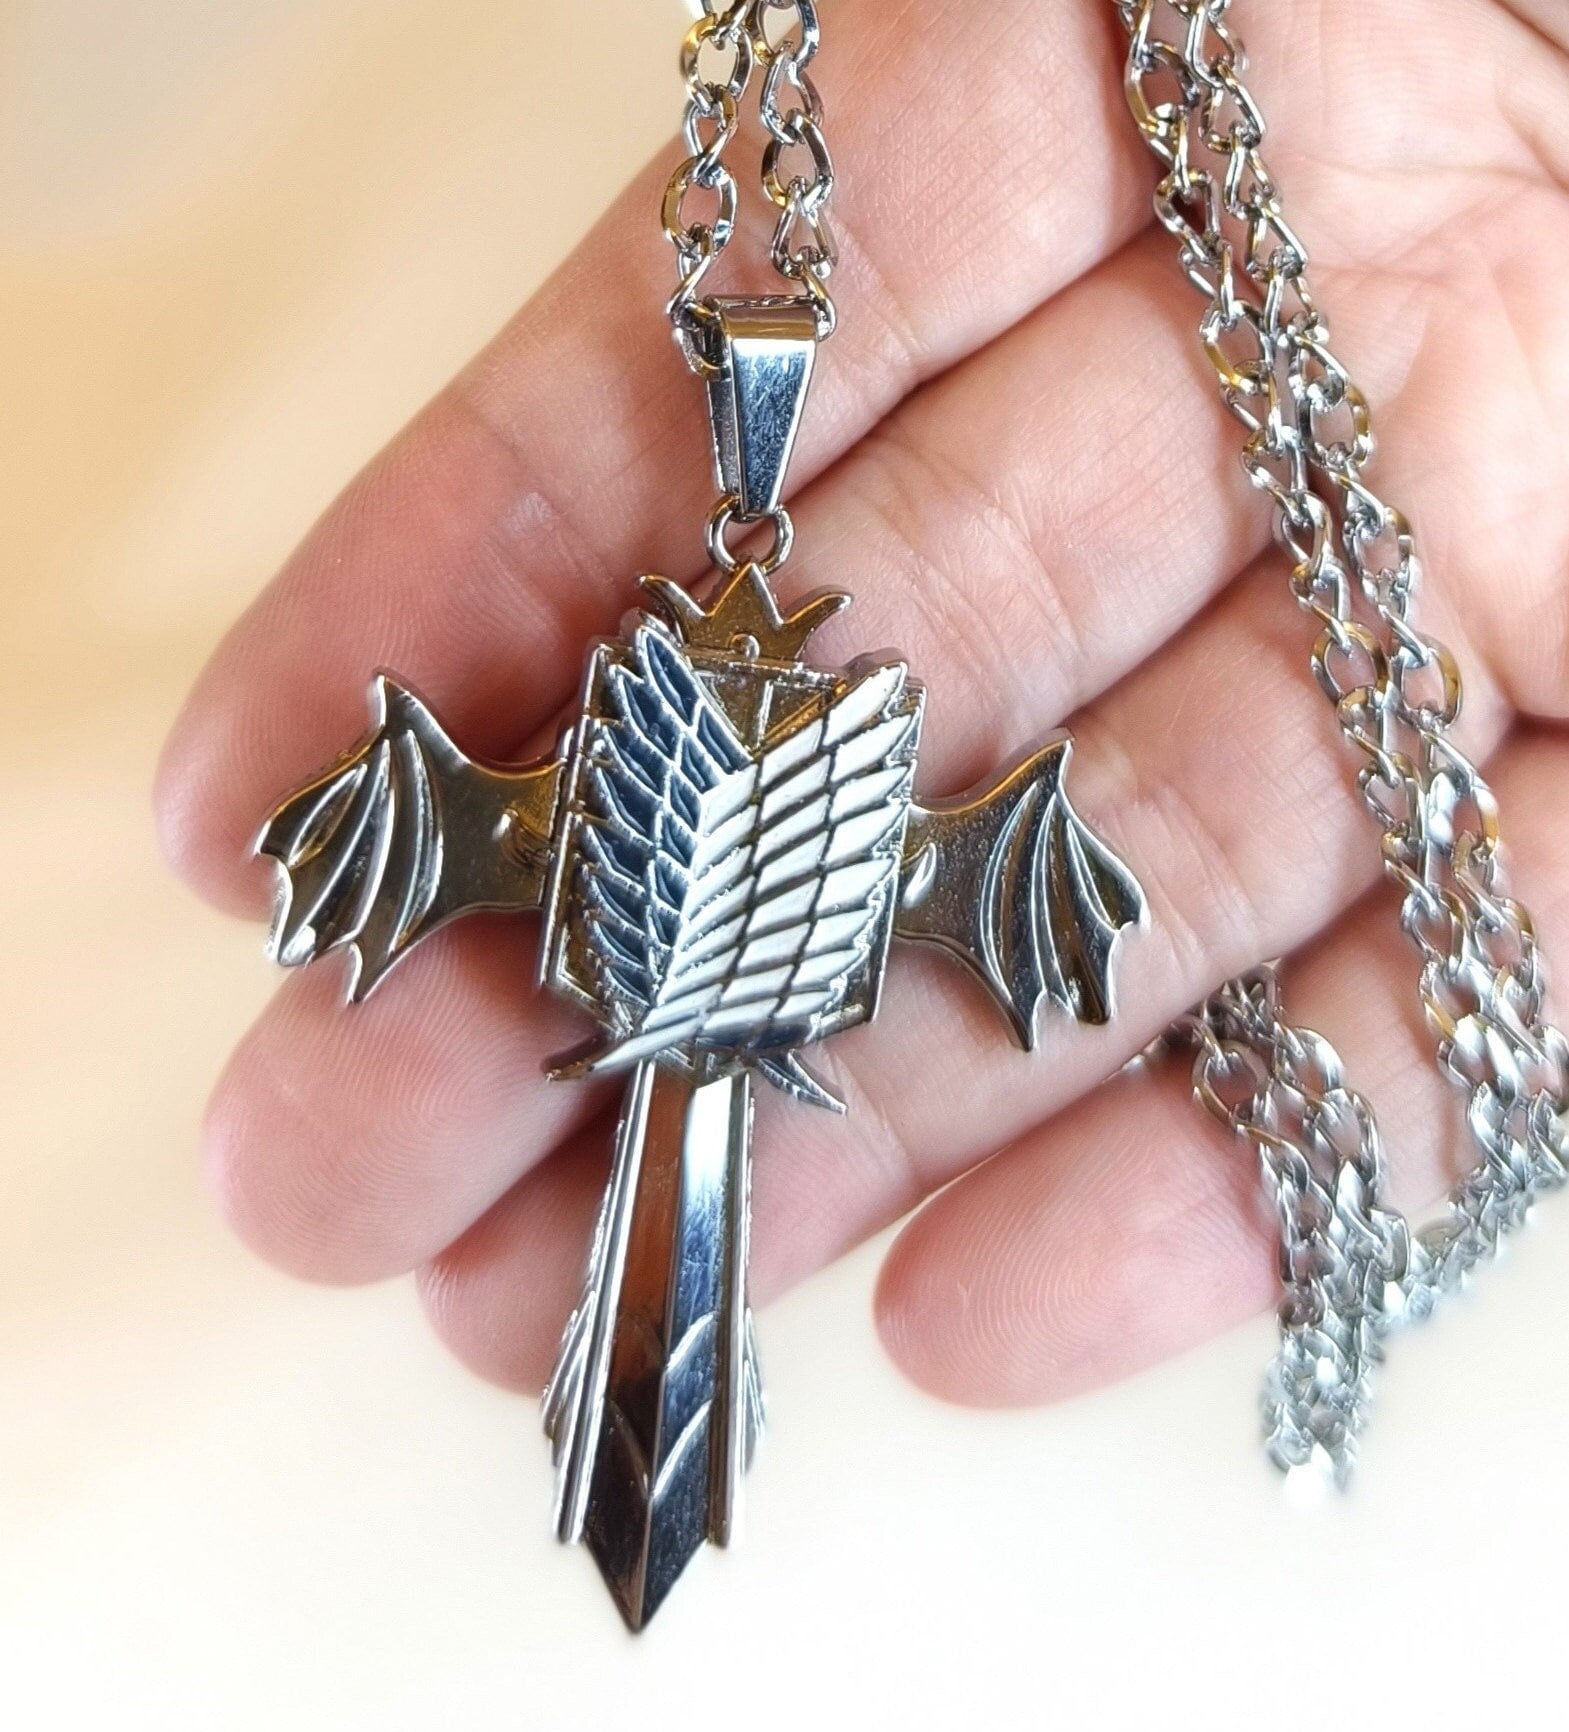 Wholesale Anime Attack On Titan Investigation Corps Logo Arrowhead Necklace  Unique Peripheral Accessory From Pingwang3, $70.36 | DHgate.Com